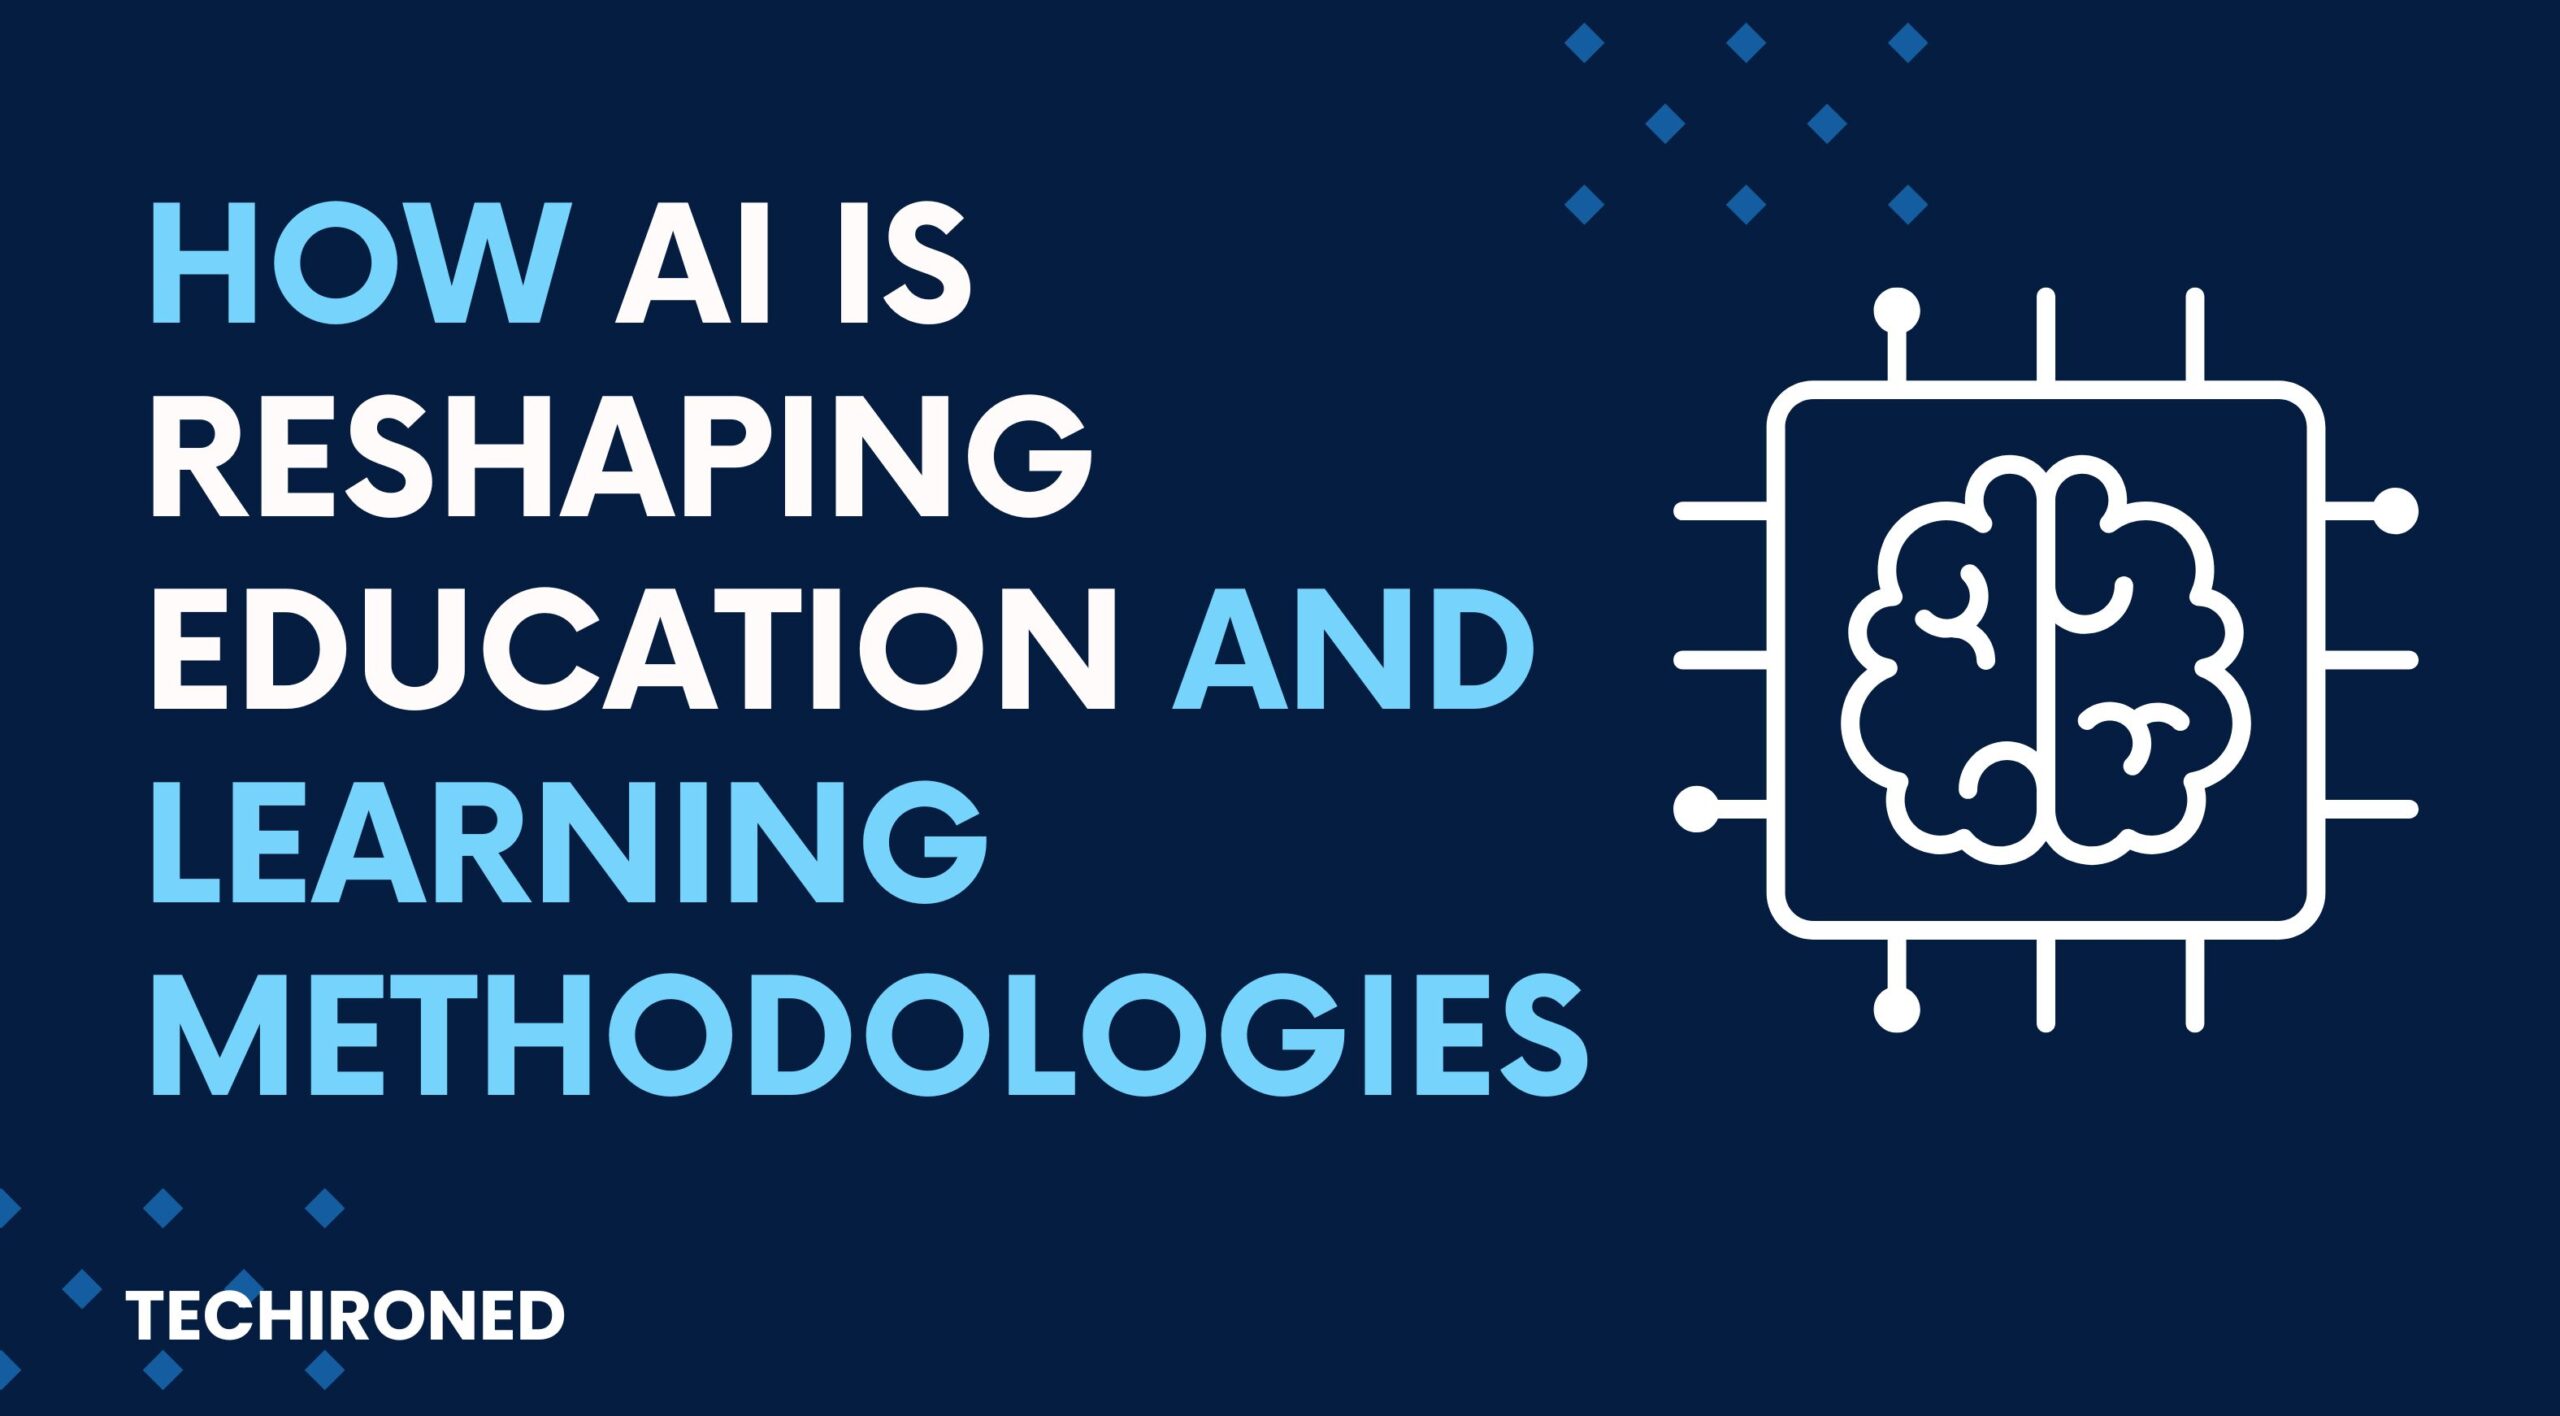 How AI is reshaping education and learning methodologies